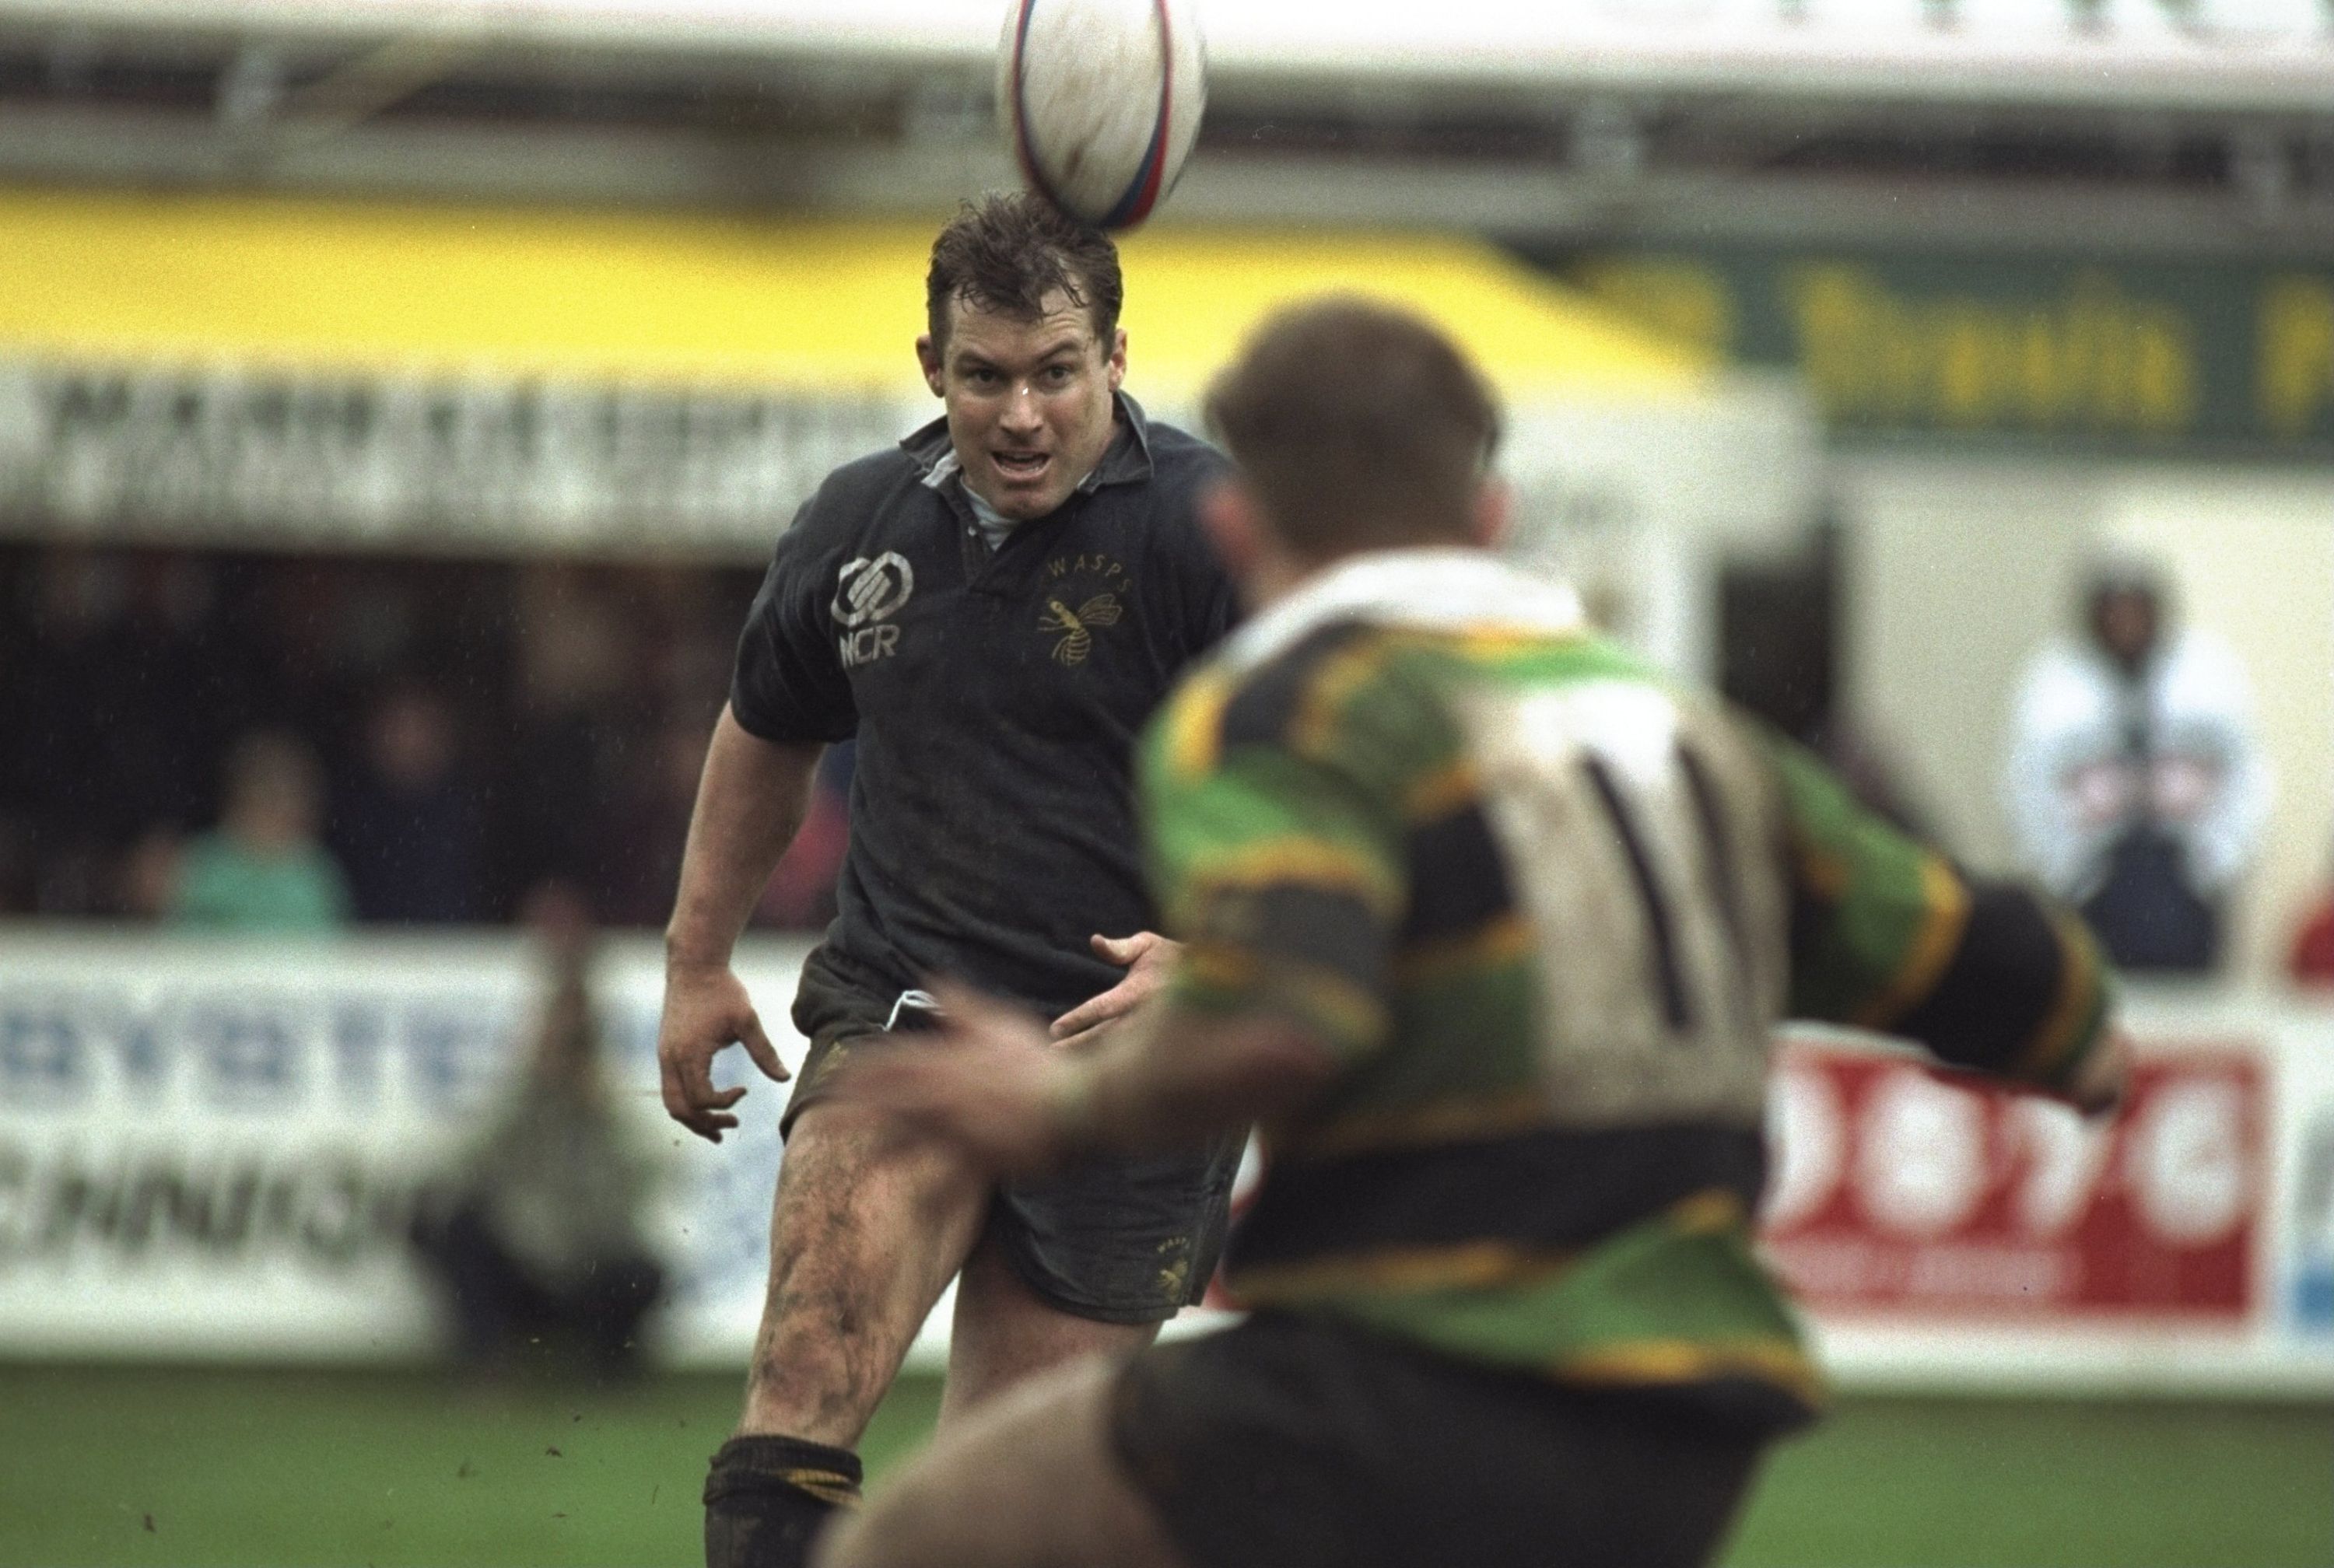 26 Apr 1997:  Gareth Rees (left) of Wasps kicks the ball forward during the Courage League Division One match against Northampton at Franklins Gardens in Northampton, England. Wasps won 15-36 and secured the Division One title.  Mandatory Credit: David Rogers /Allsport